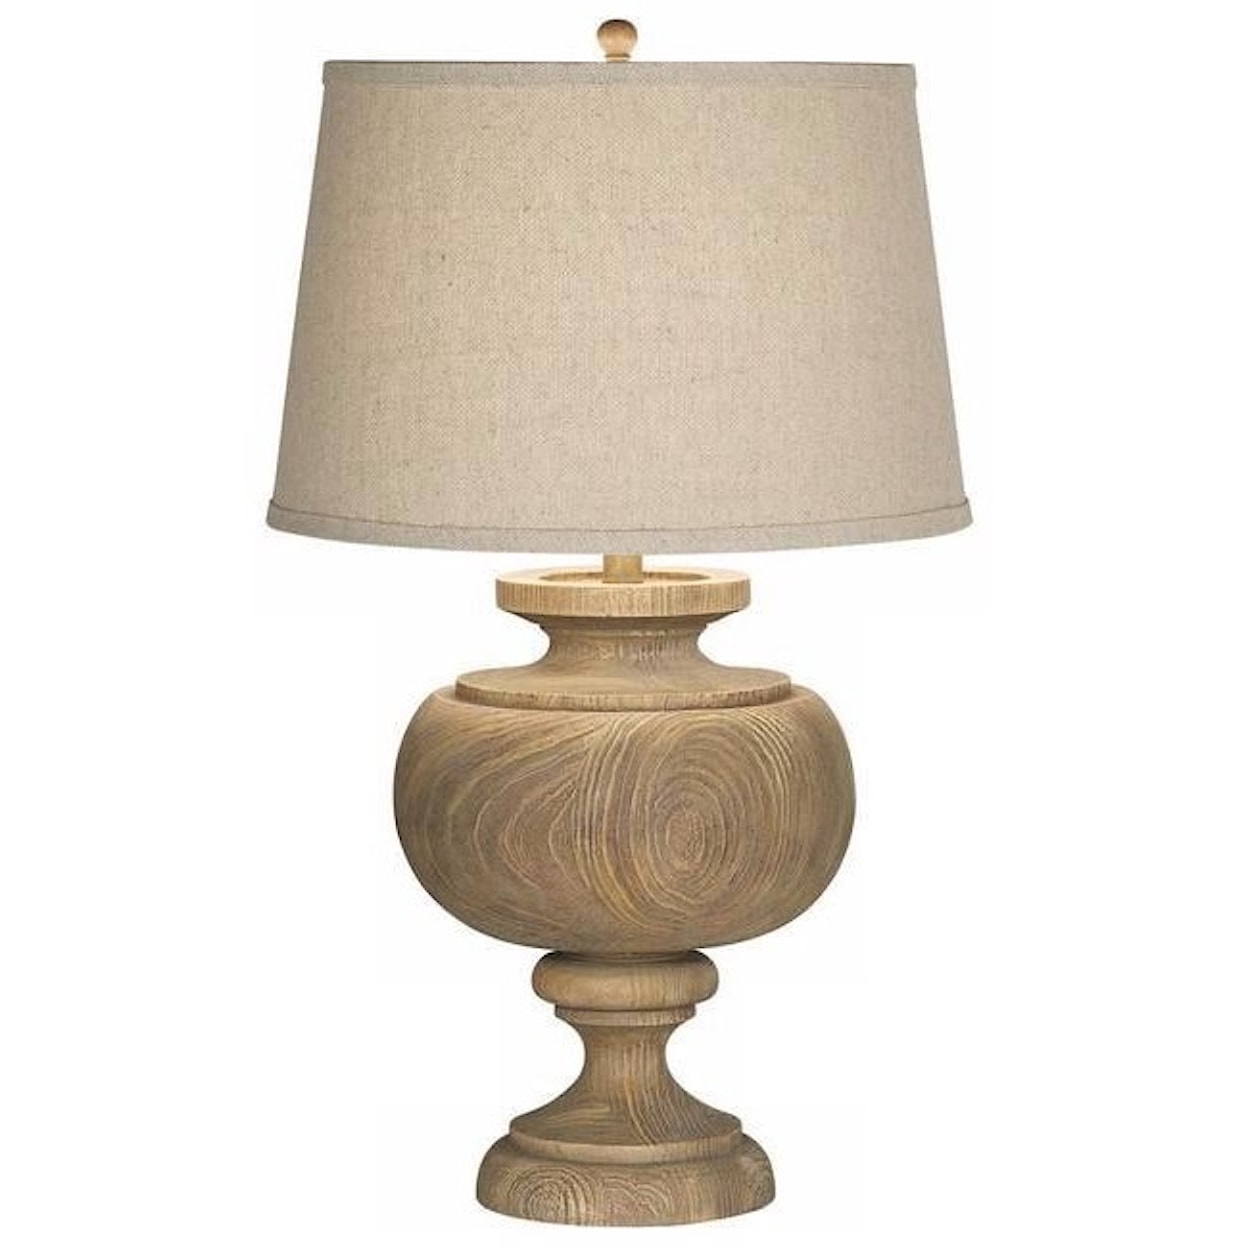 Pacific Coast Lighting Table Lamps Kathy Ireland Grand Maison Large Table Lamp